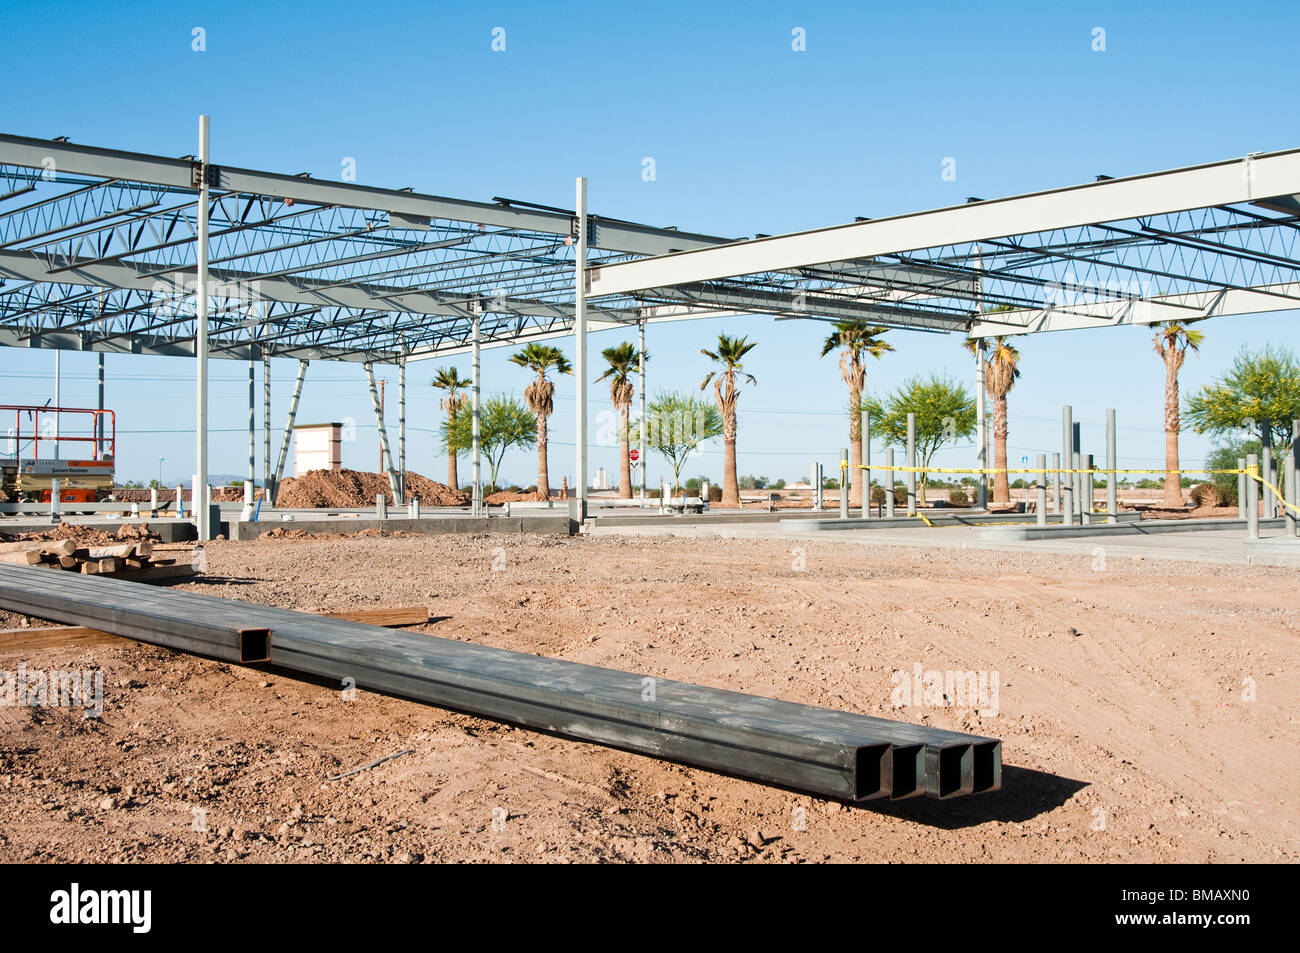 the structural steel skeleton of a new commercial building with square steel beams in the foreground Stock Photo